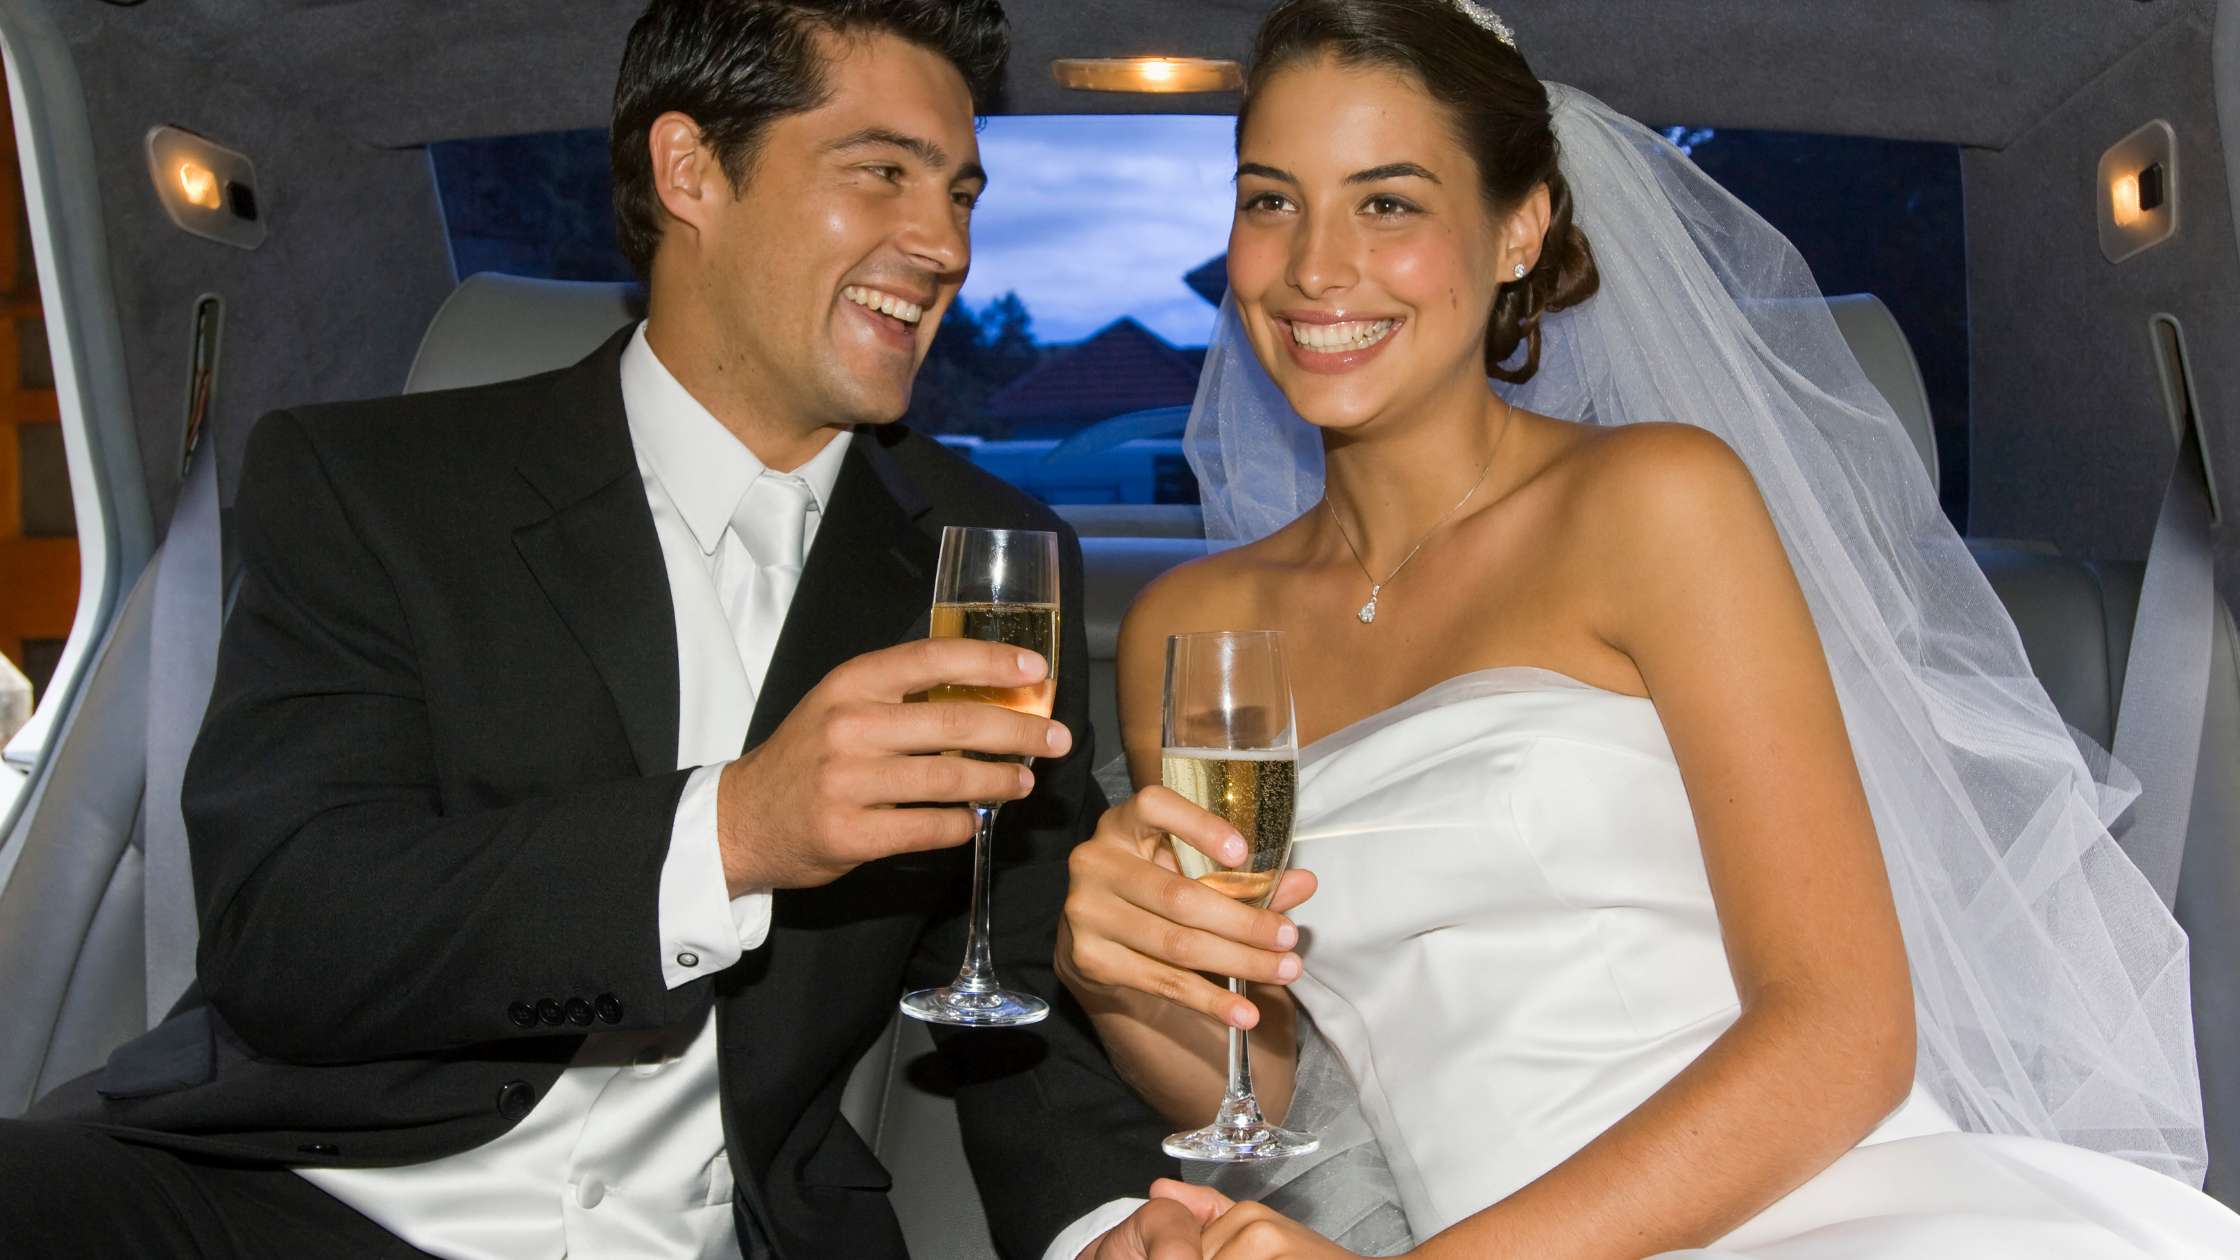 Discover the benefits of having limo transportation for your wedding and how Blackline Car Service can add some luxury and style to your wedding day.